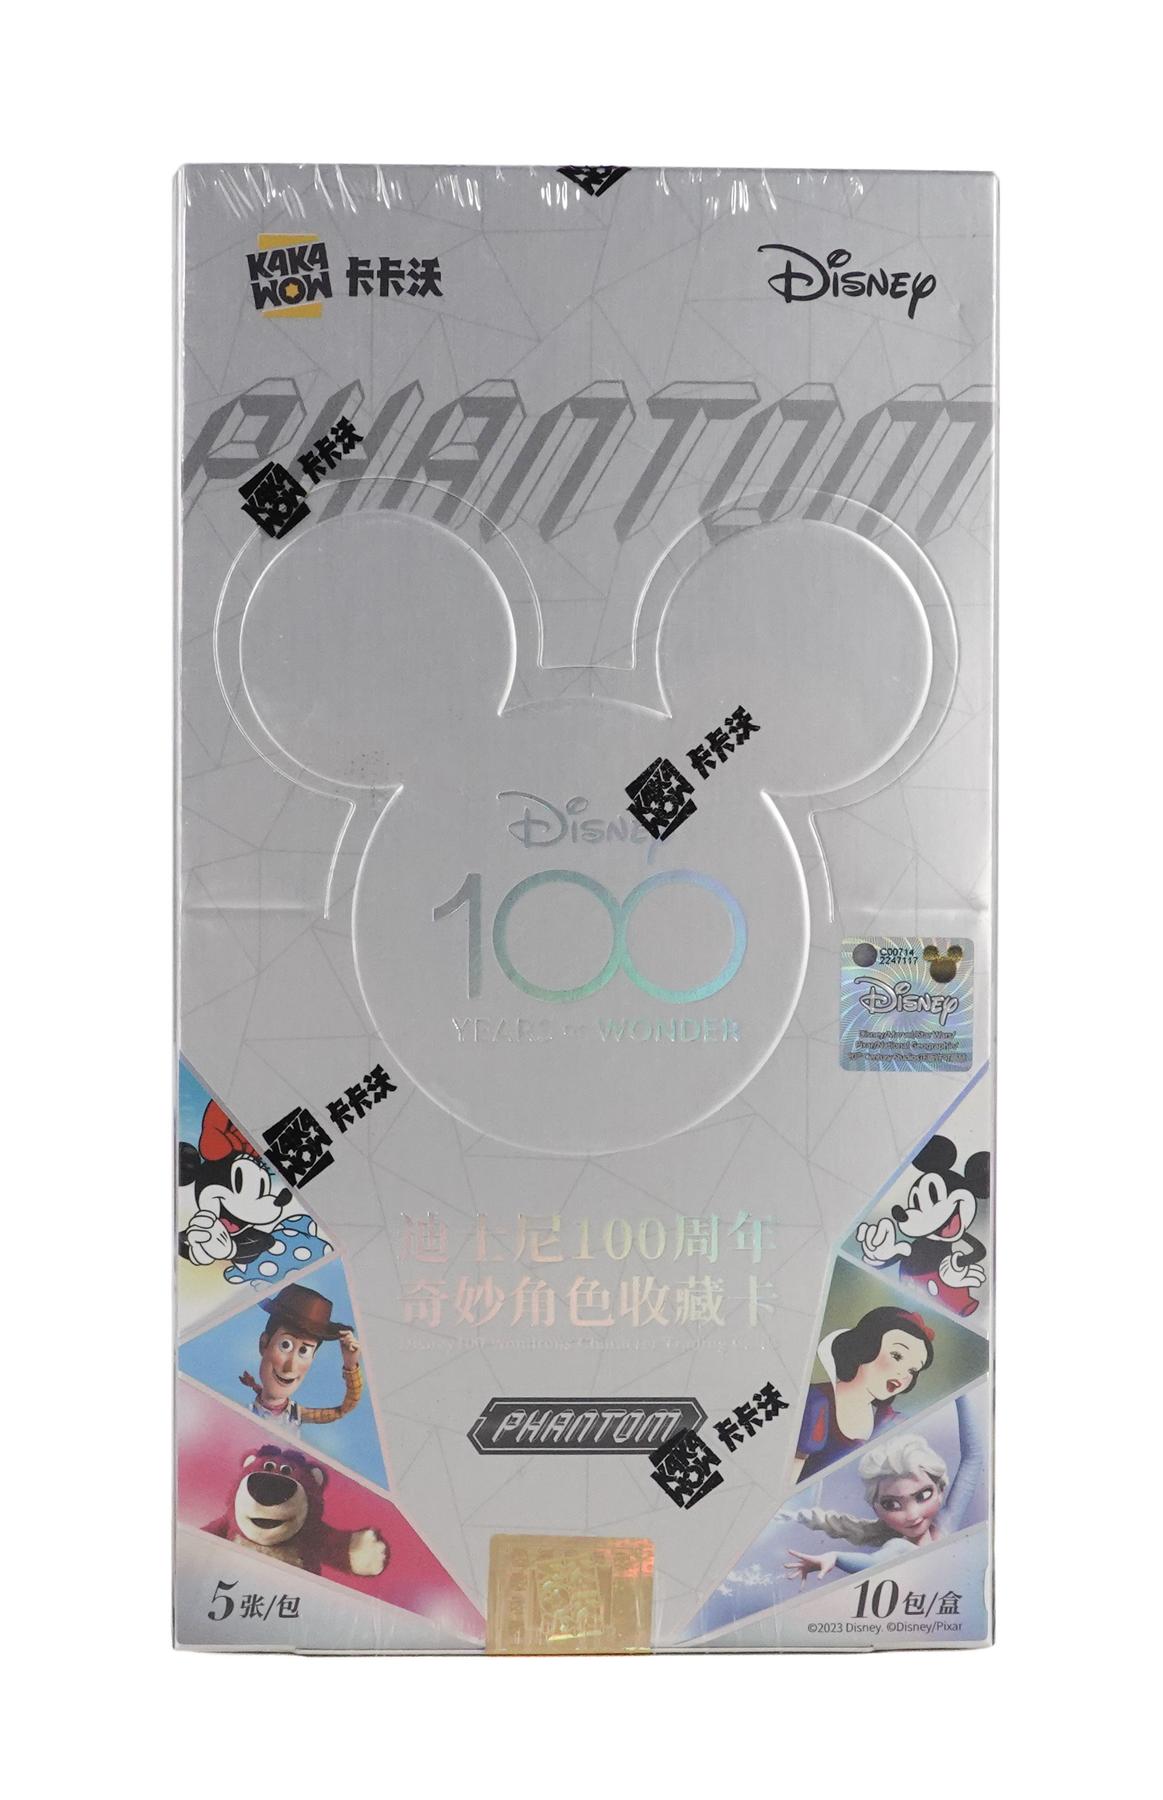 DISNEY 100 ANS POP UP COLLECTION N°14 MAGAZINE NEUF